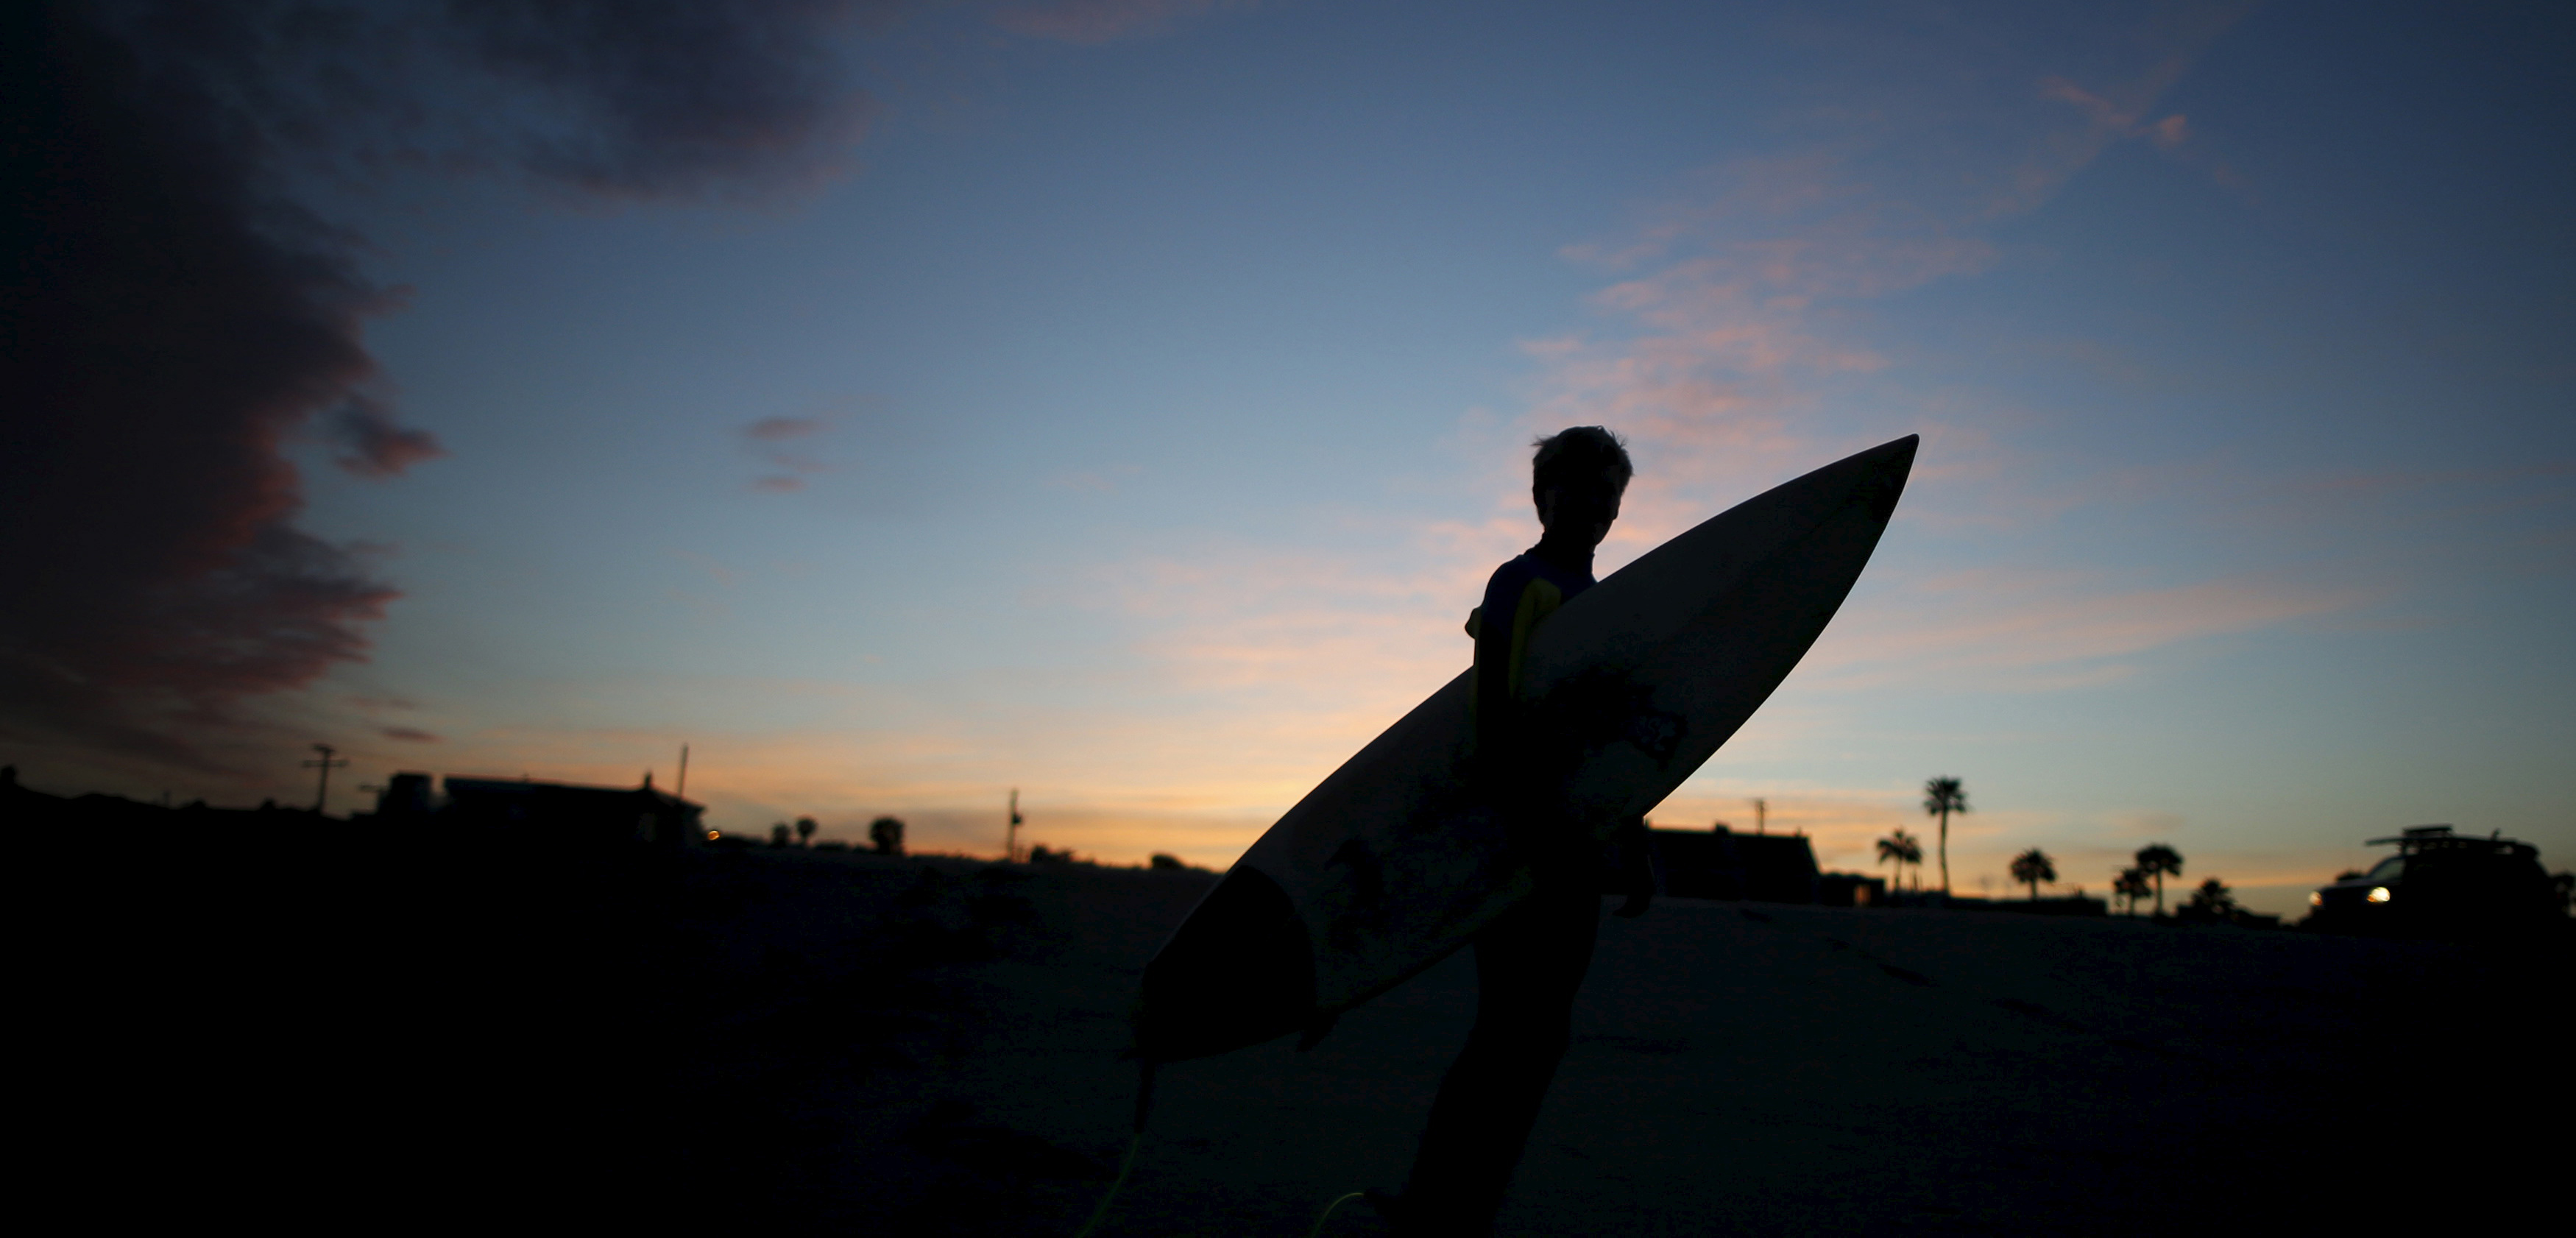 A 13-year-old surfer in California. Photo by Lucy Nicholson/Reuters/Corbis